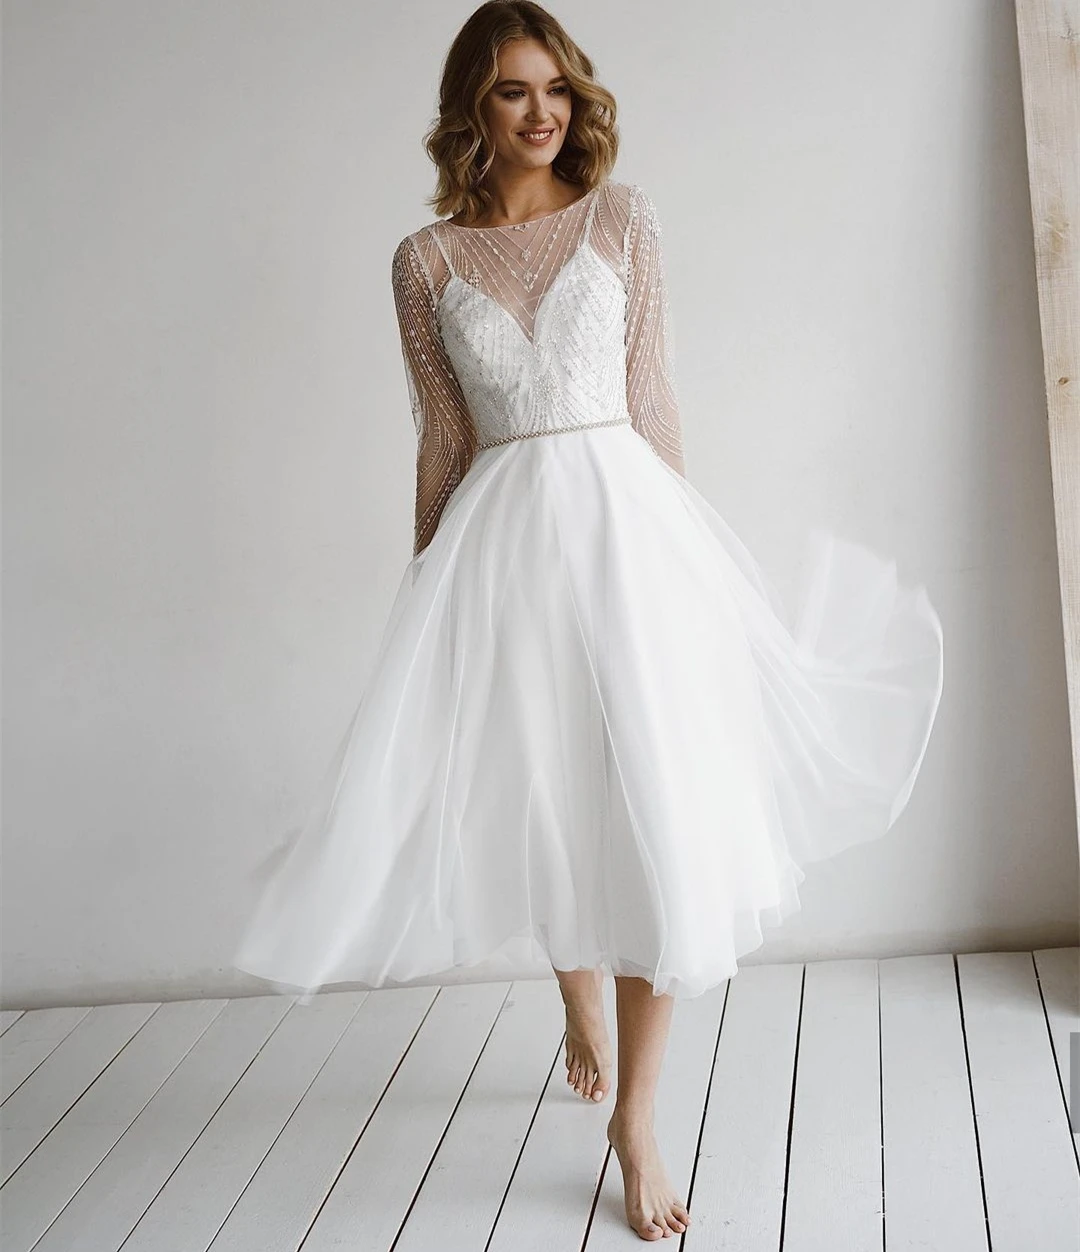 

Simple Short O-Neck Wedding Dress 2022 Long Sleeves Beading Sashes Tassel Backless Appliques Party Gown Robe De Mariee Mid Calf